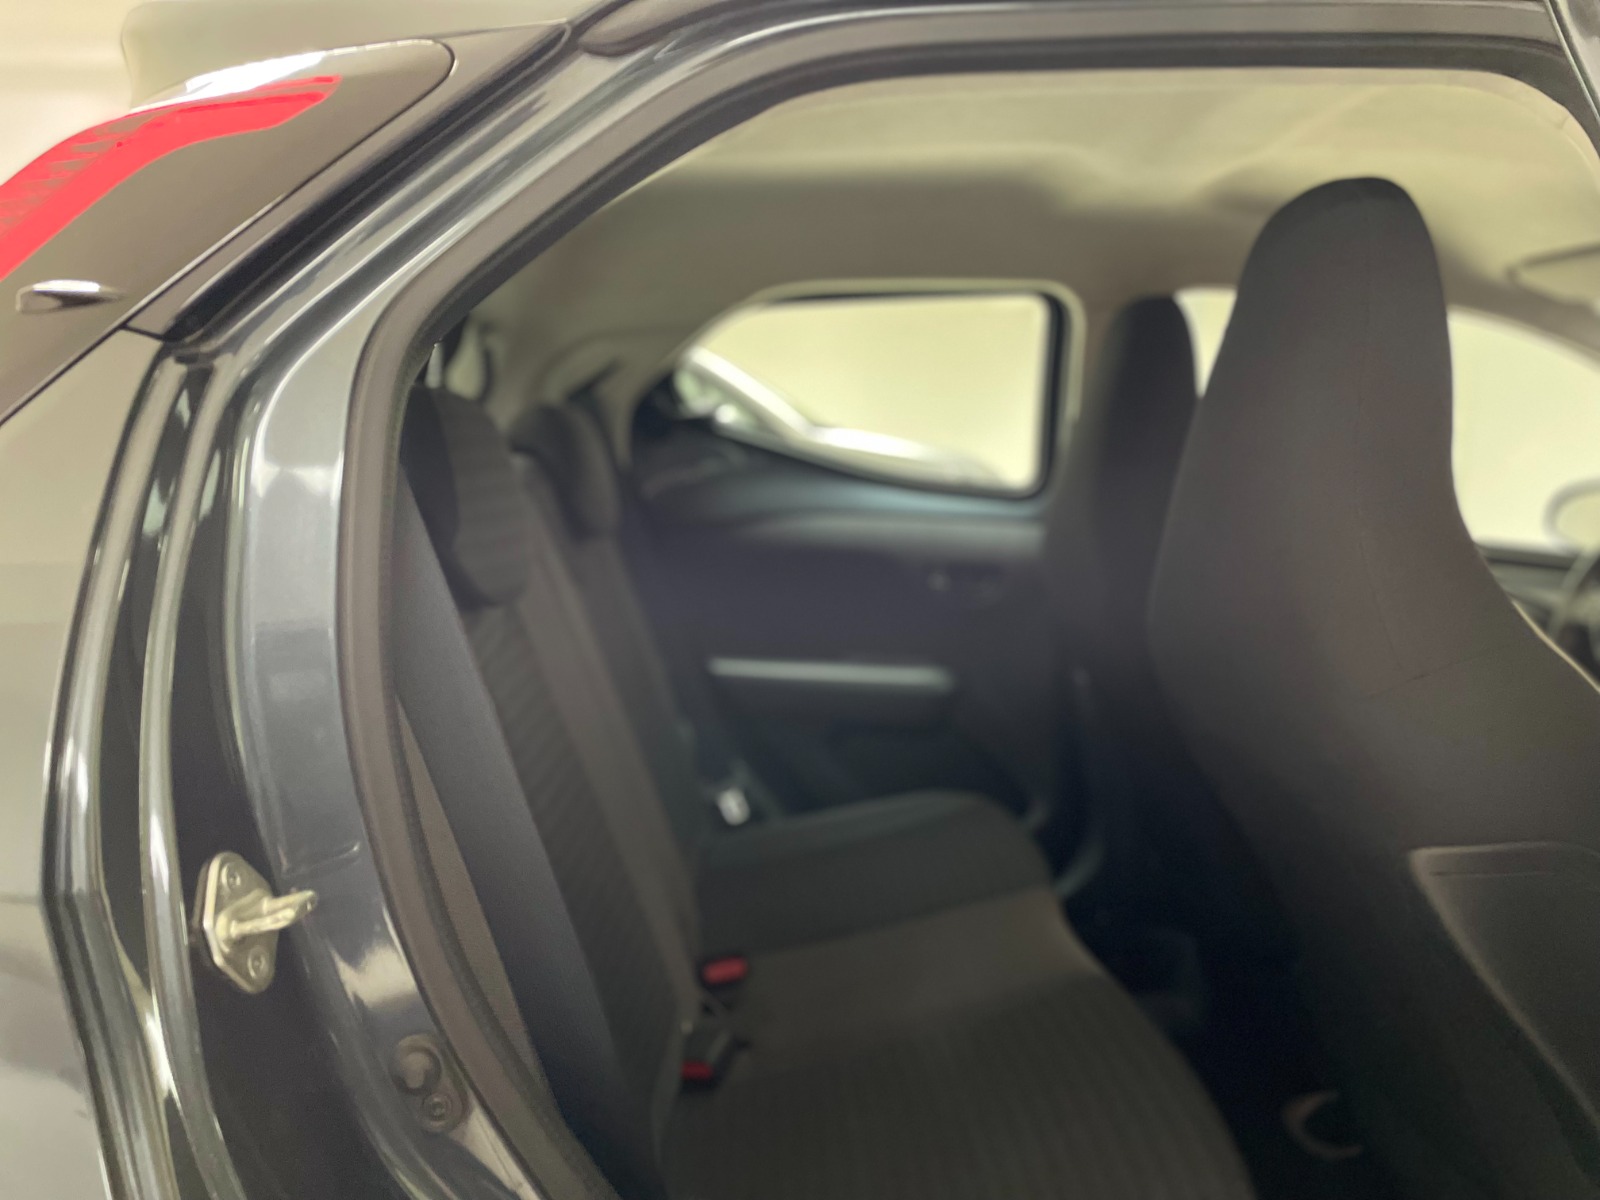 TOYOTA AYGO CONNECT BUSINESS 1.0